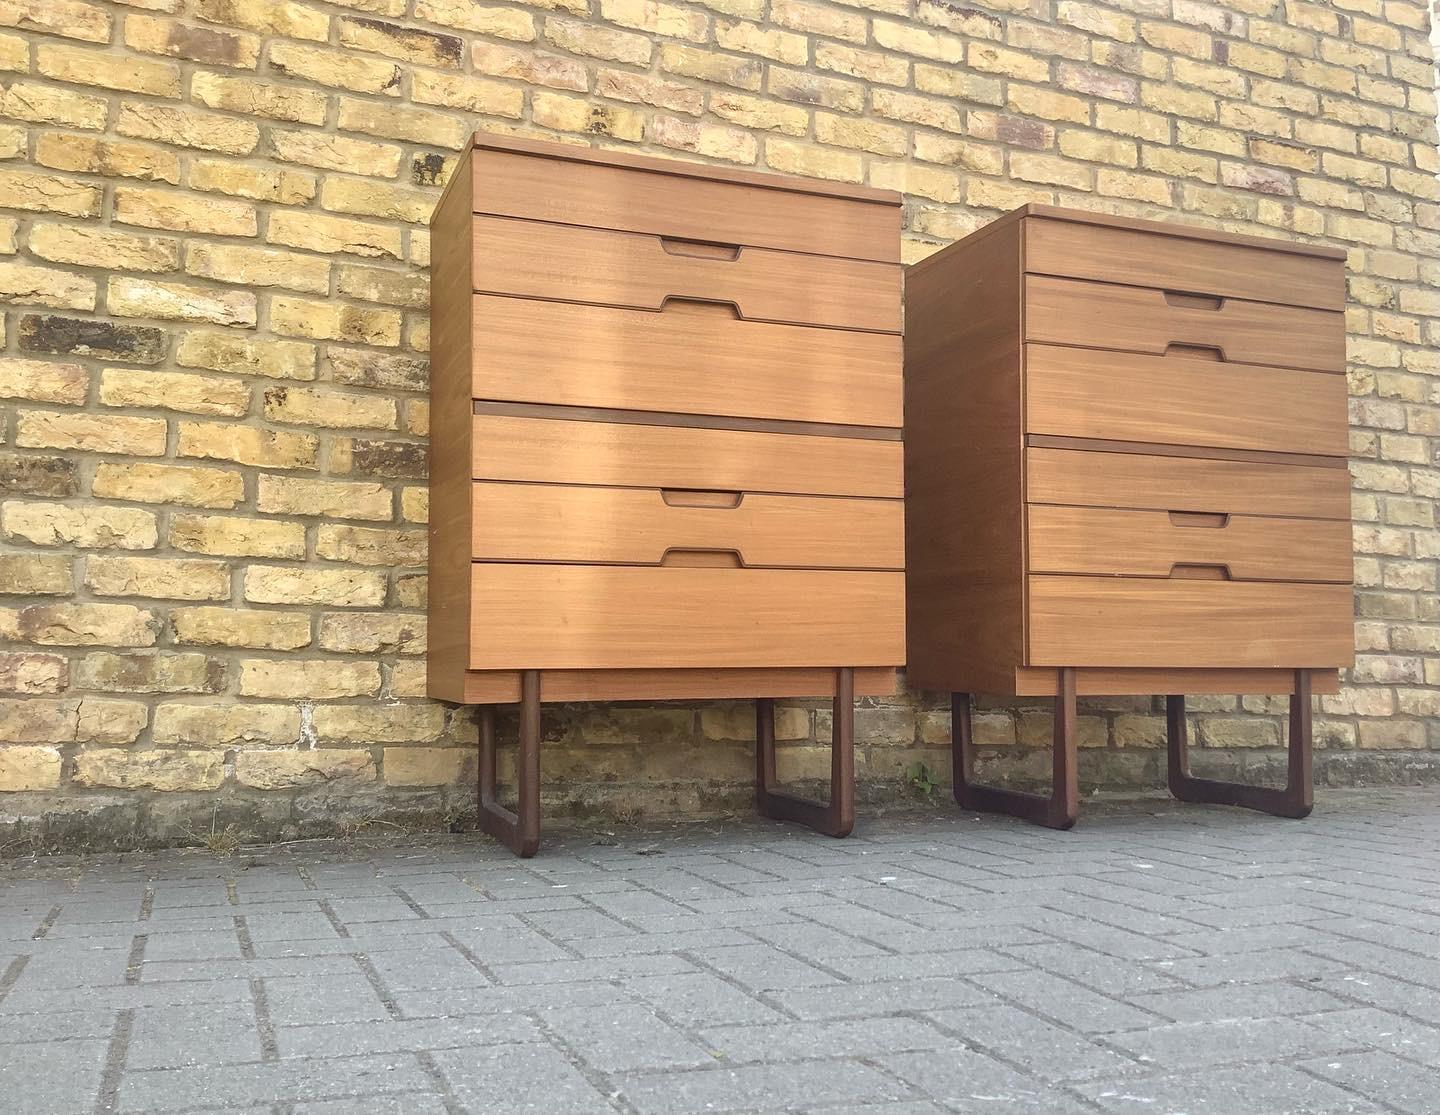 Superb rare pair of 1960s Danish inspired tallboy chest of drawers designed by Gunther Hoffstead for Uniflex of Great Britain as part of the ’Q’ series. This unit features 6 different sized drawers with smart recessed handles and sleigh legs,